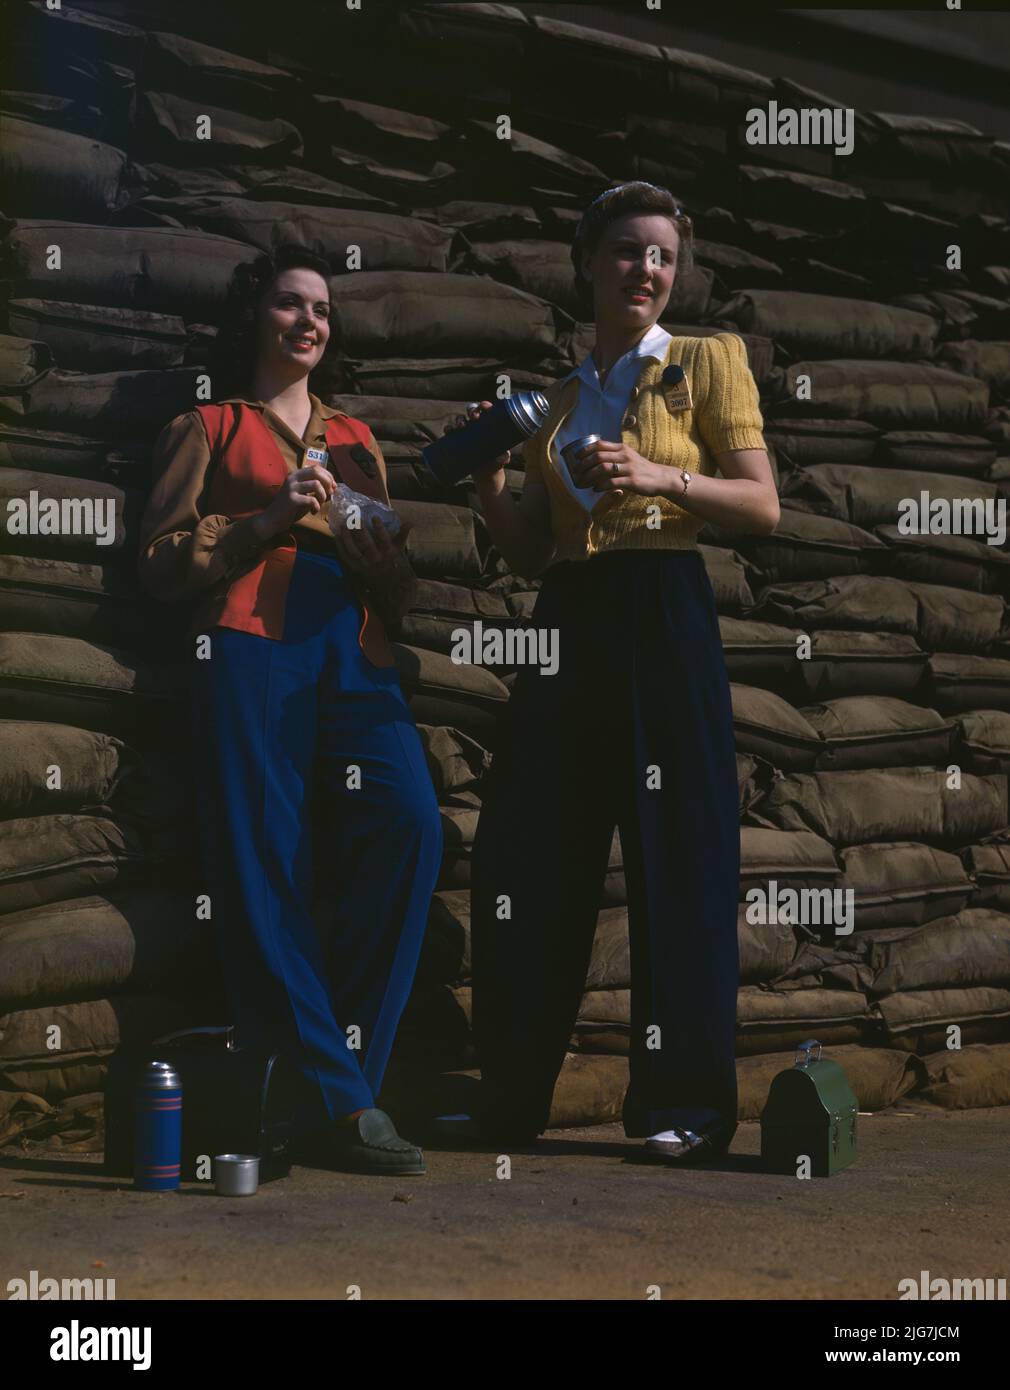 Lunchtime brings a few minutes of rest for these women workers of the assembly line at Douglas Aircraft Company's plant, Long Beach, Calif. Sand bags for protection against air raid form the background. Most important of the many types of aircraft made at this plant are the B-17F (&quot;Flying Fortress&quot;) heavy bomber, the A-20 (&quot;Havoc&quot;) assault bomber, and the C-47 heavy transport plane for the carrying of troops and cargo. Stock Photo